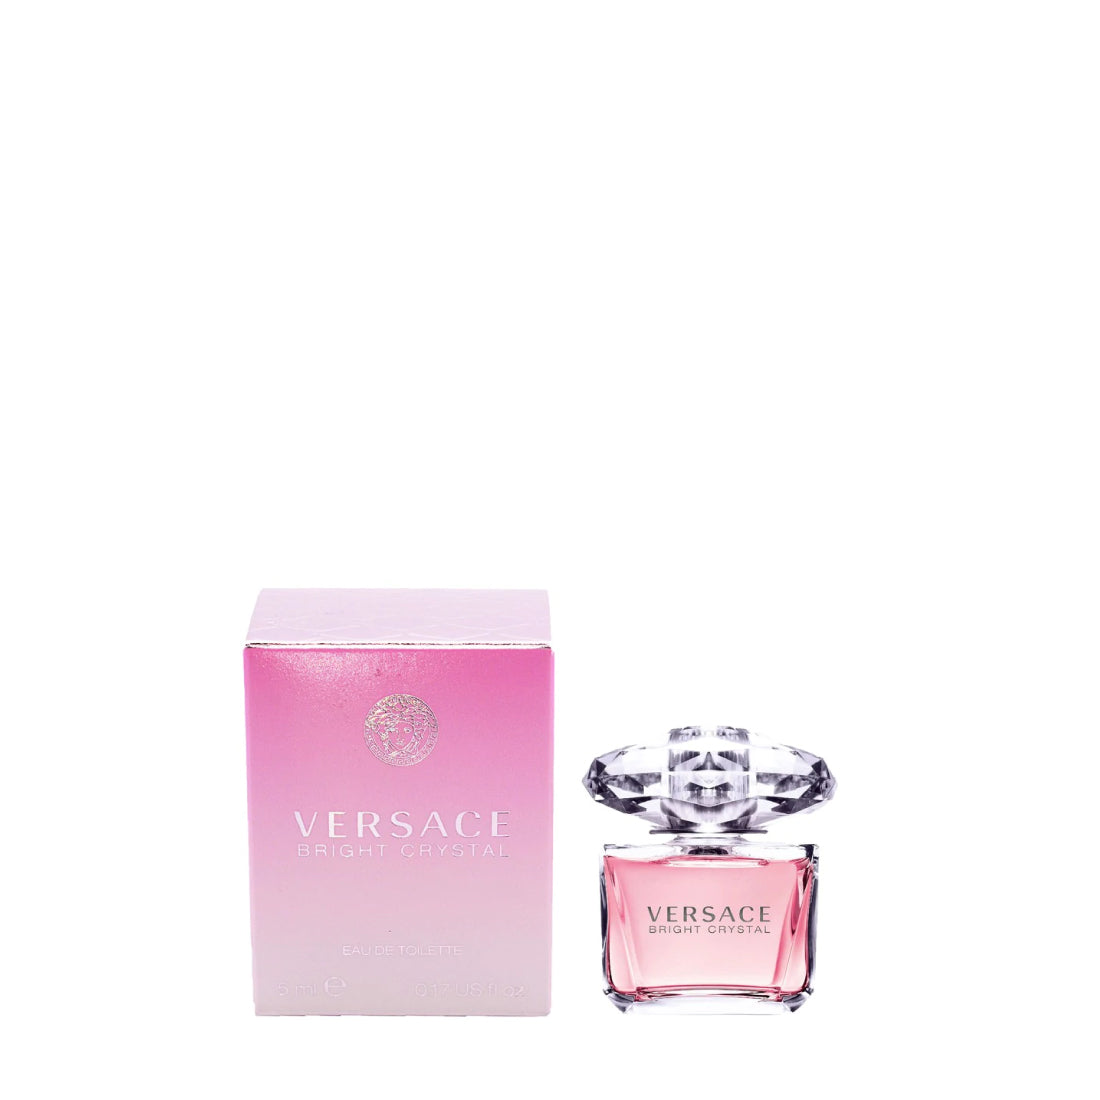 ZARA FABULOUS SWEET PERFUME & VERSACE BRIGHT CRYSTAL EDT REVIEW 